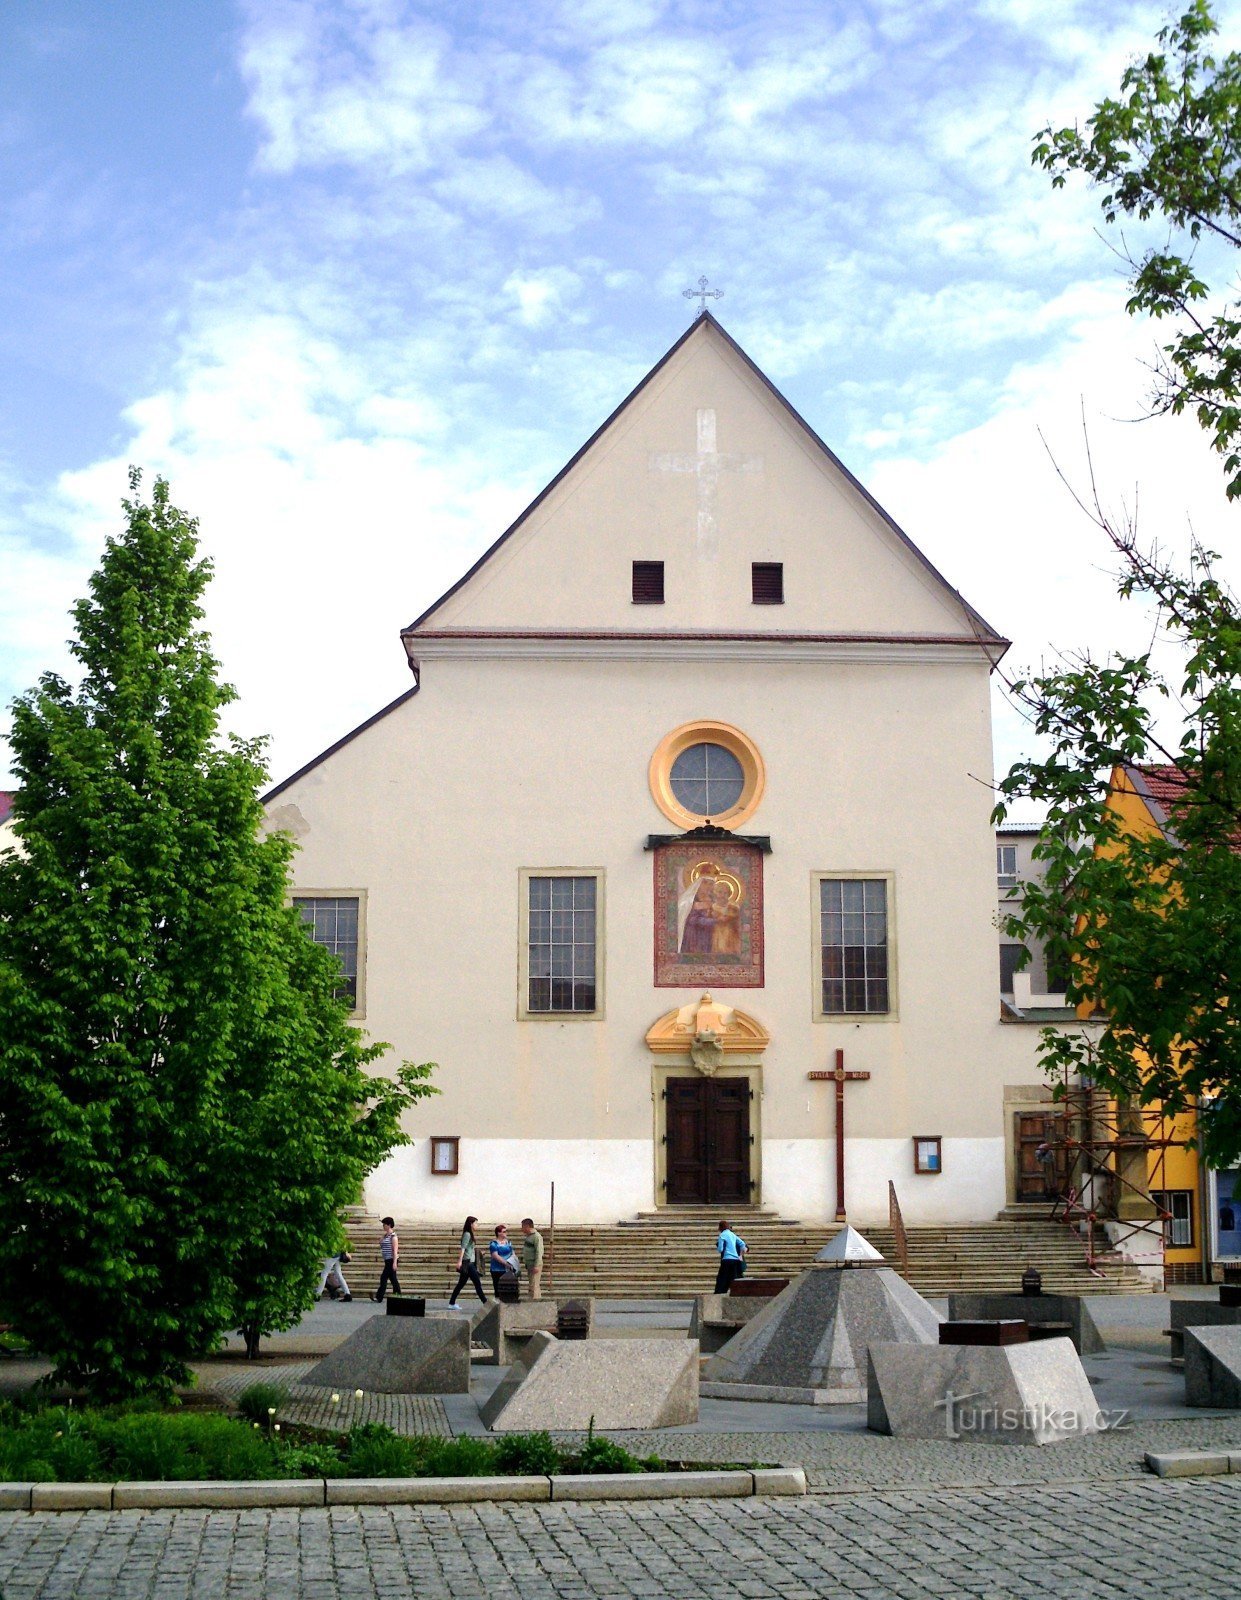 Kyjov - Church of the Assumption of the Virgin Mary and Saints Cyril and Methodius